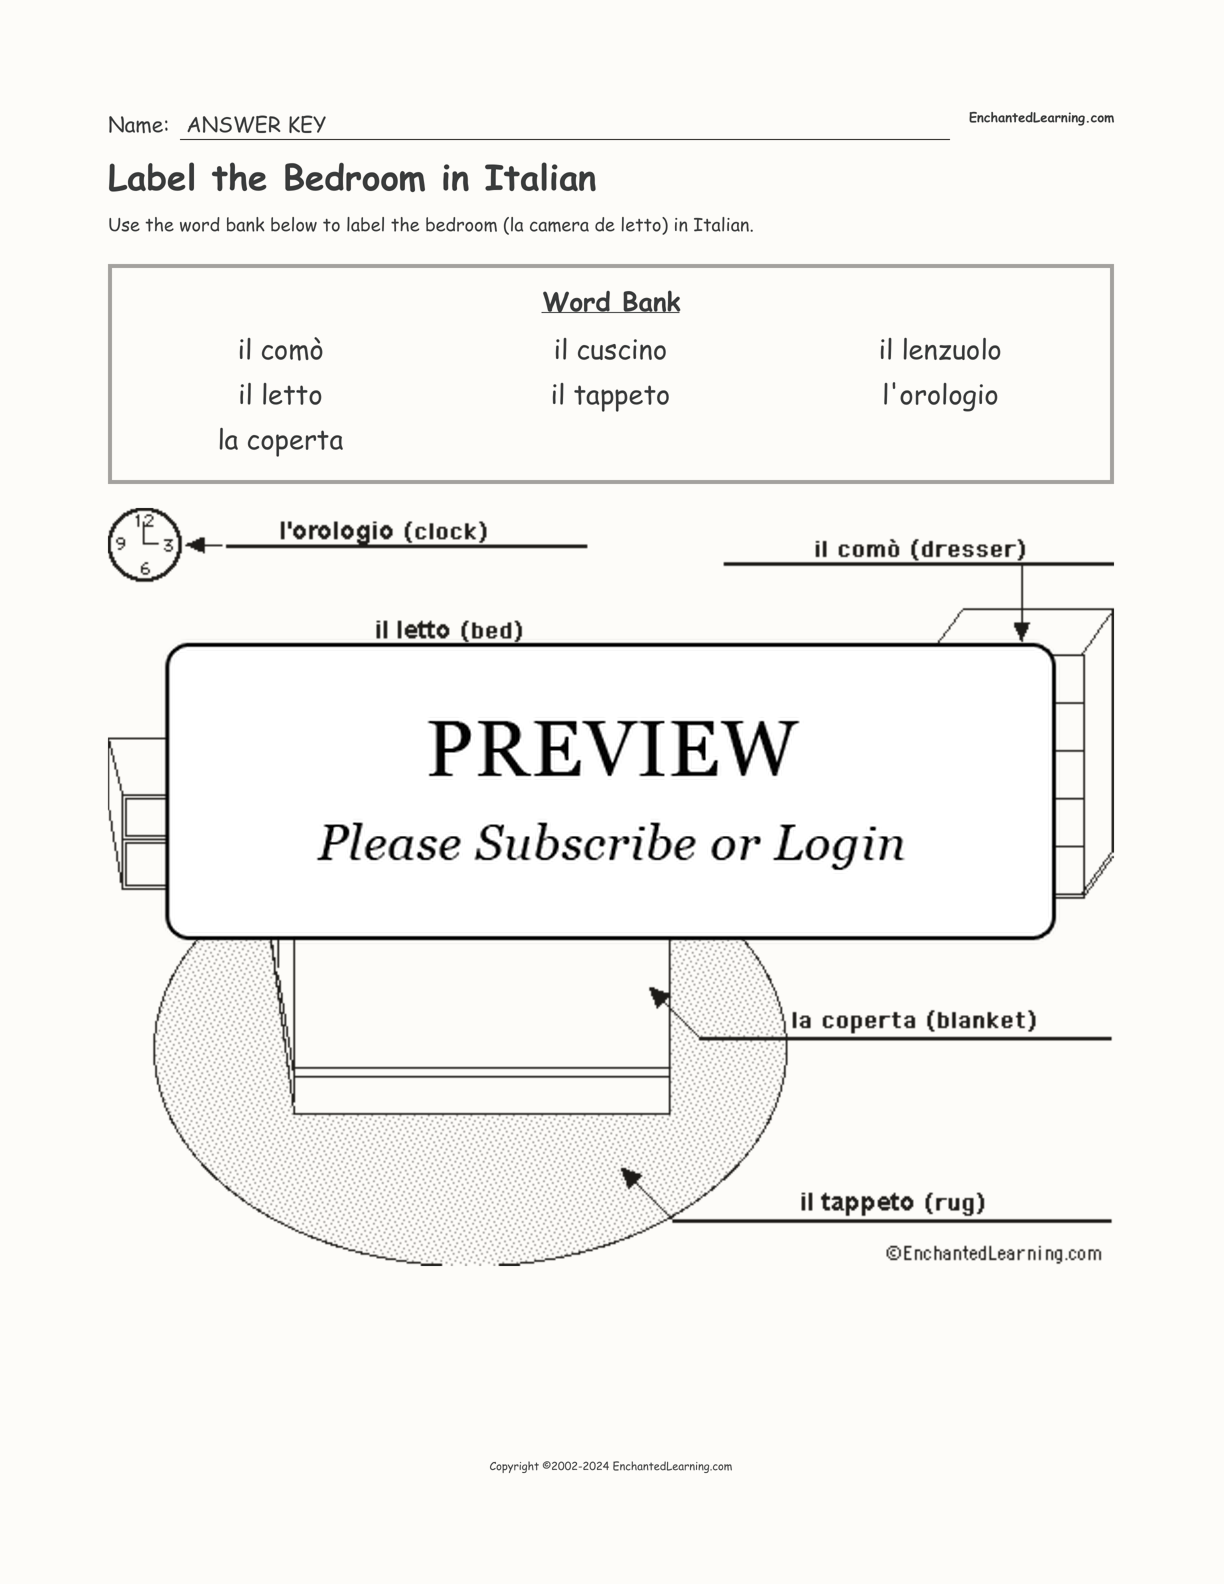 Label the Bedroom in Italian interactive worksheet page 2